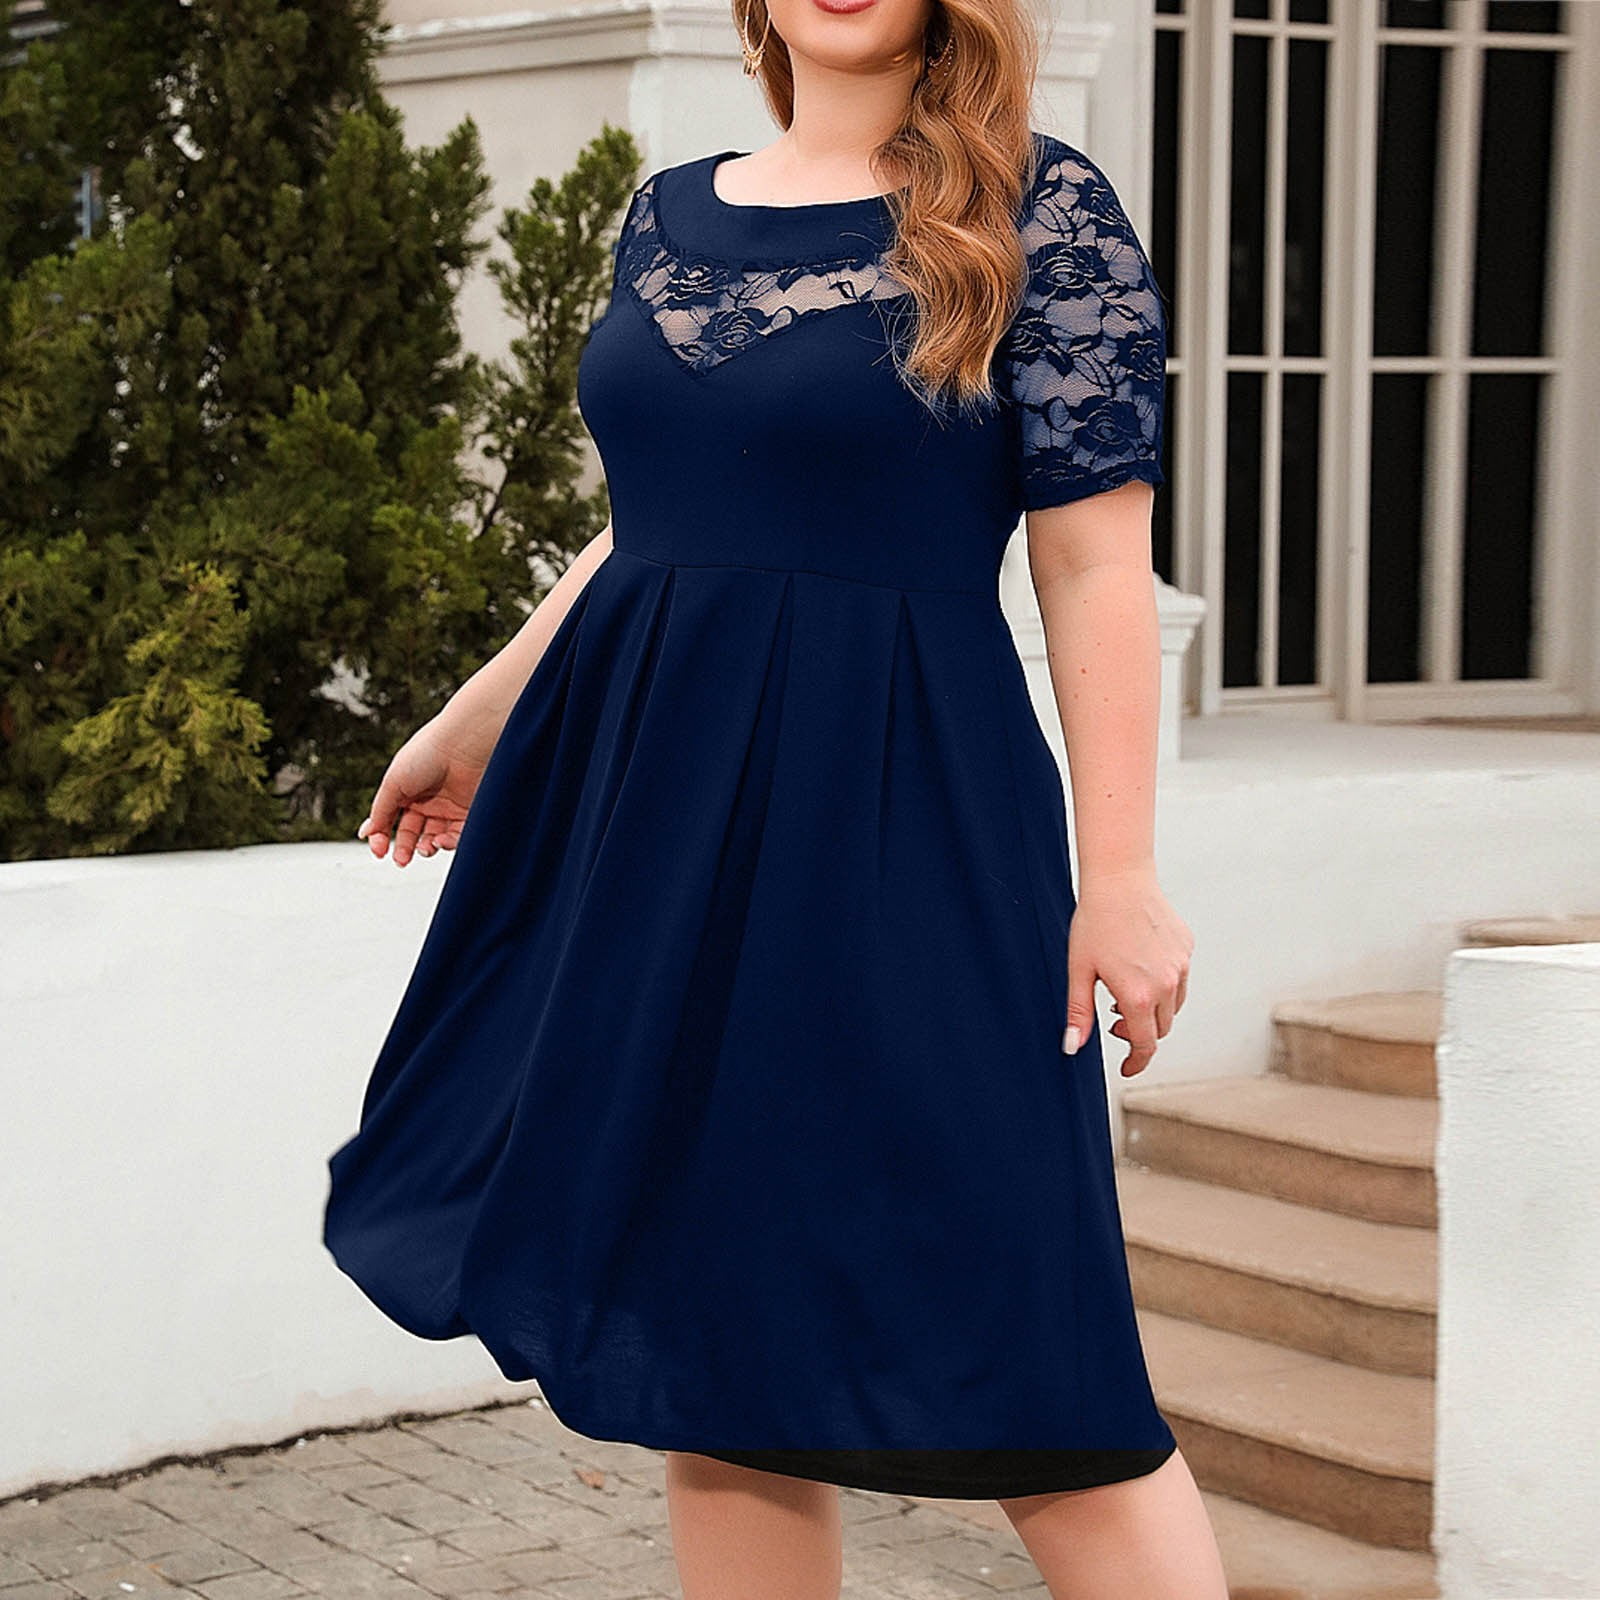 YWDJ Formal Dresses for Women Party Dress Summer Plus Size Casual